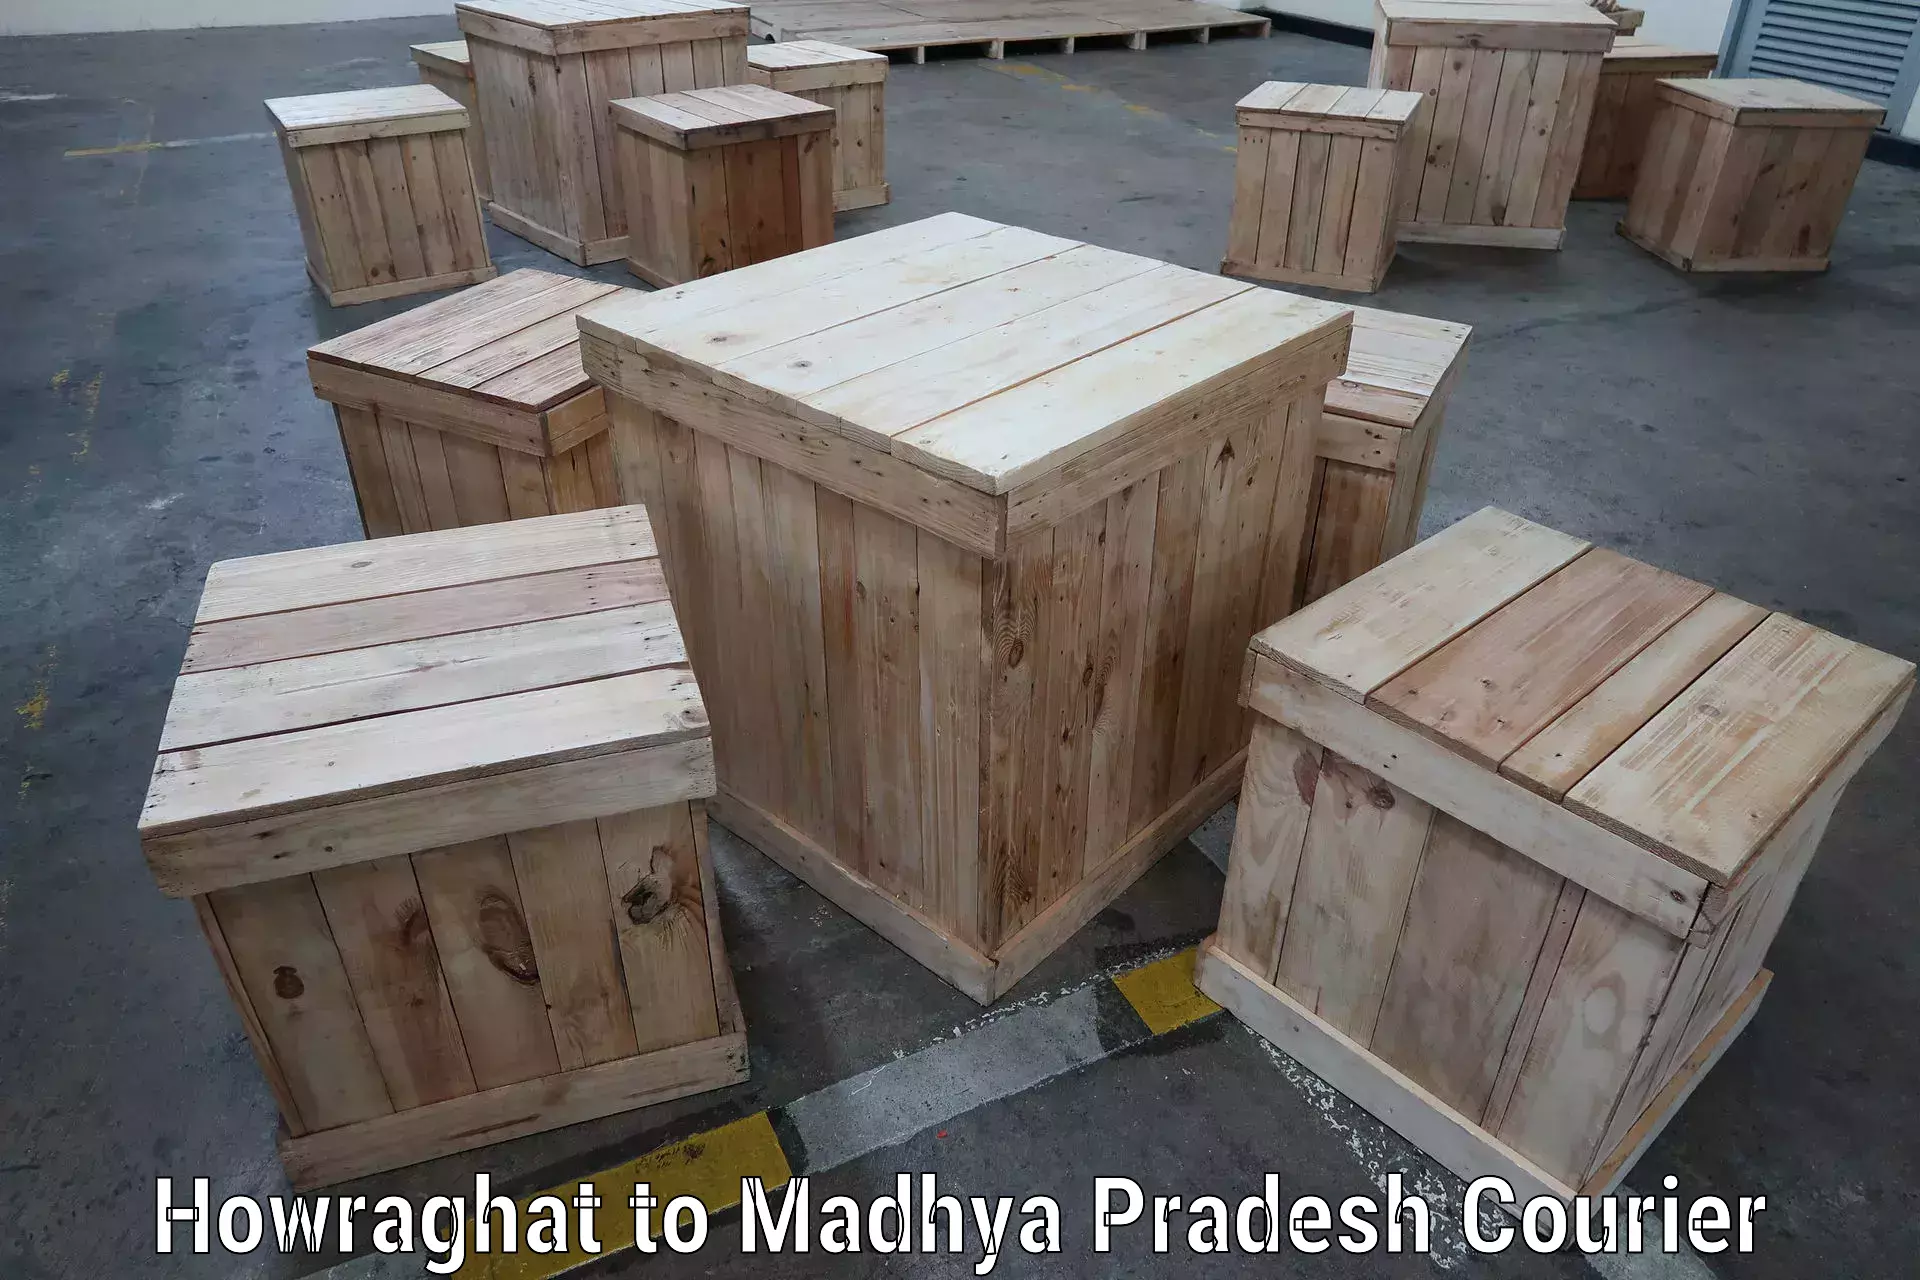 Round-the-clock parcel delivery Howraghat to Madhya Pradesh